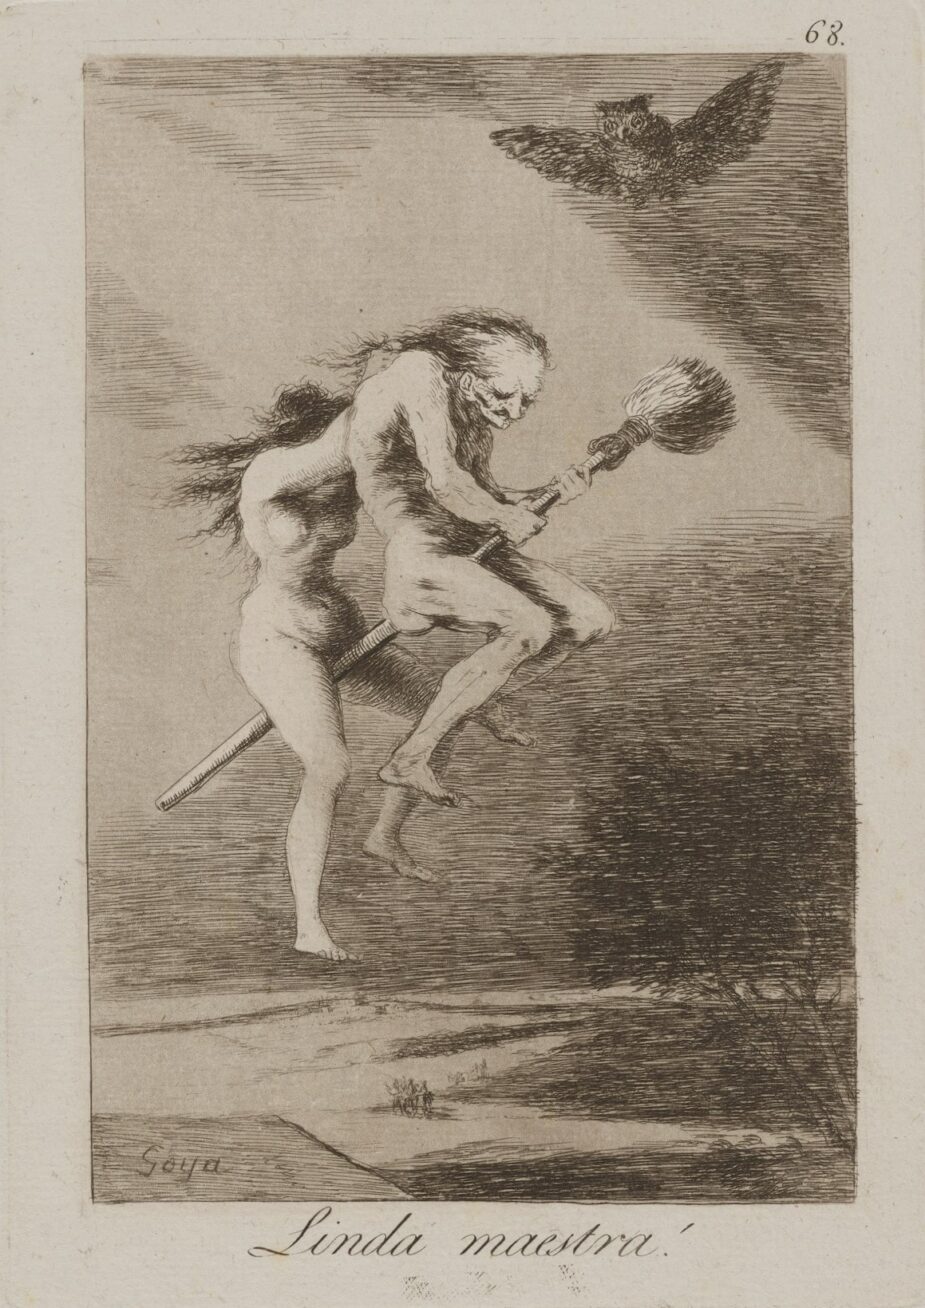 3. Linda maesra! (Pretty teacher!), plate 68 from the series Los Caprichos, 1799, etching, plate: 8 1/4 in x 5 7/8 in; sheet: 11 5/8 in x 7 5/8 in. An etching featuring two nude figures riding a broomstick in the sky. The two figures sit astride the broom, facing right, the broom’s straw end held aloft. The figure at front appears older with a drooping head, sparse hair, and wrinkled face. Their body appears drawn and thin. The figure behind is younger with a fleshy body and long hair flowing in the wind. They hold the first figure by the scruff of the neck, obscuring their own face with an outstretched arm. Behind them a dark sky is created with short horizontal strokes. Unmarked areas become the clouds. An owl with outstretched wings is positioned at upper right above the pair. The two figures ride above a far-off landscape showing trees and water. The artist’s signature is at bottom left.